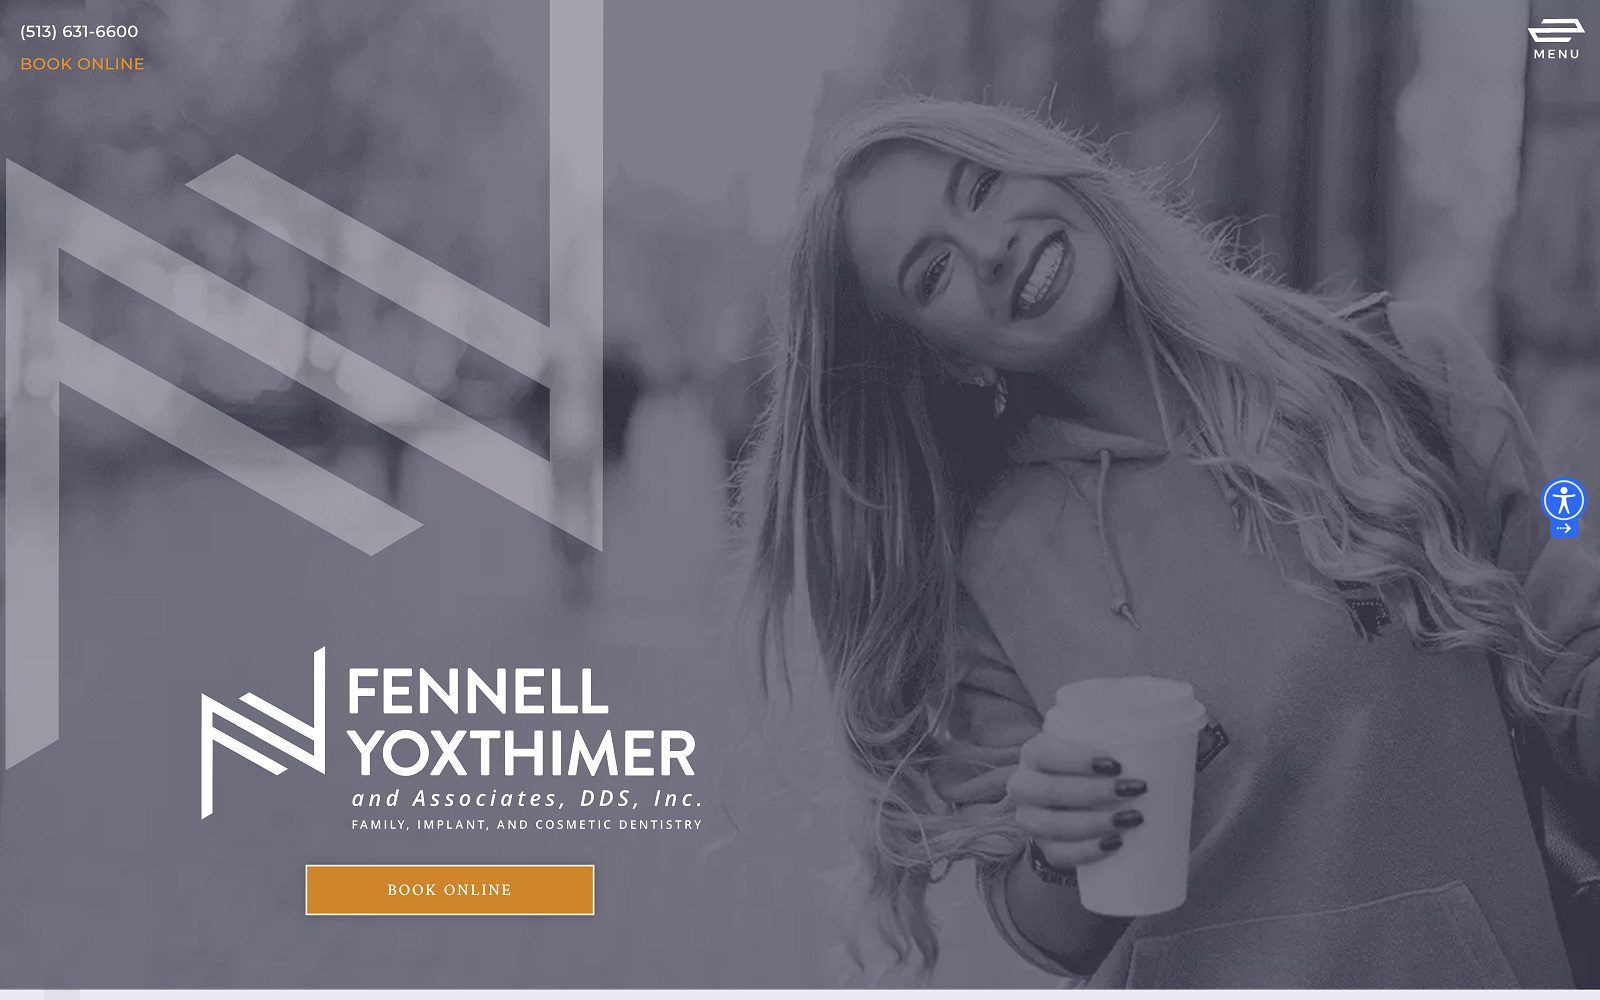 The screenshot of fennell, yoxthimer and associates, dds, inc. Website